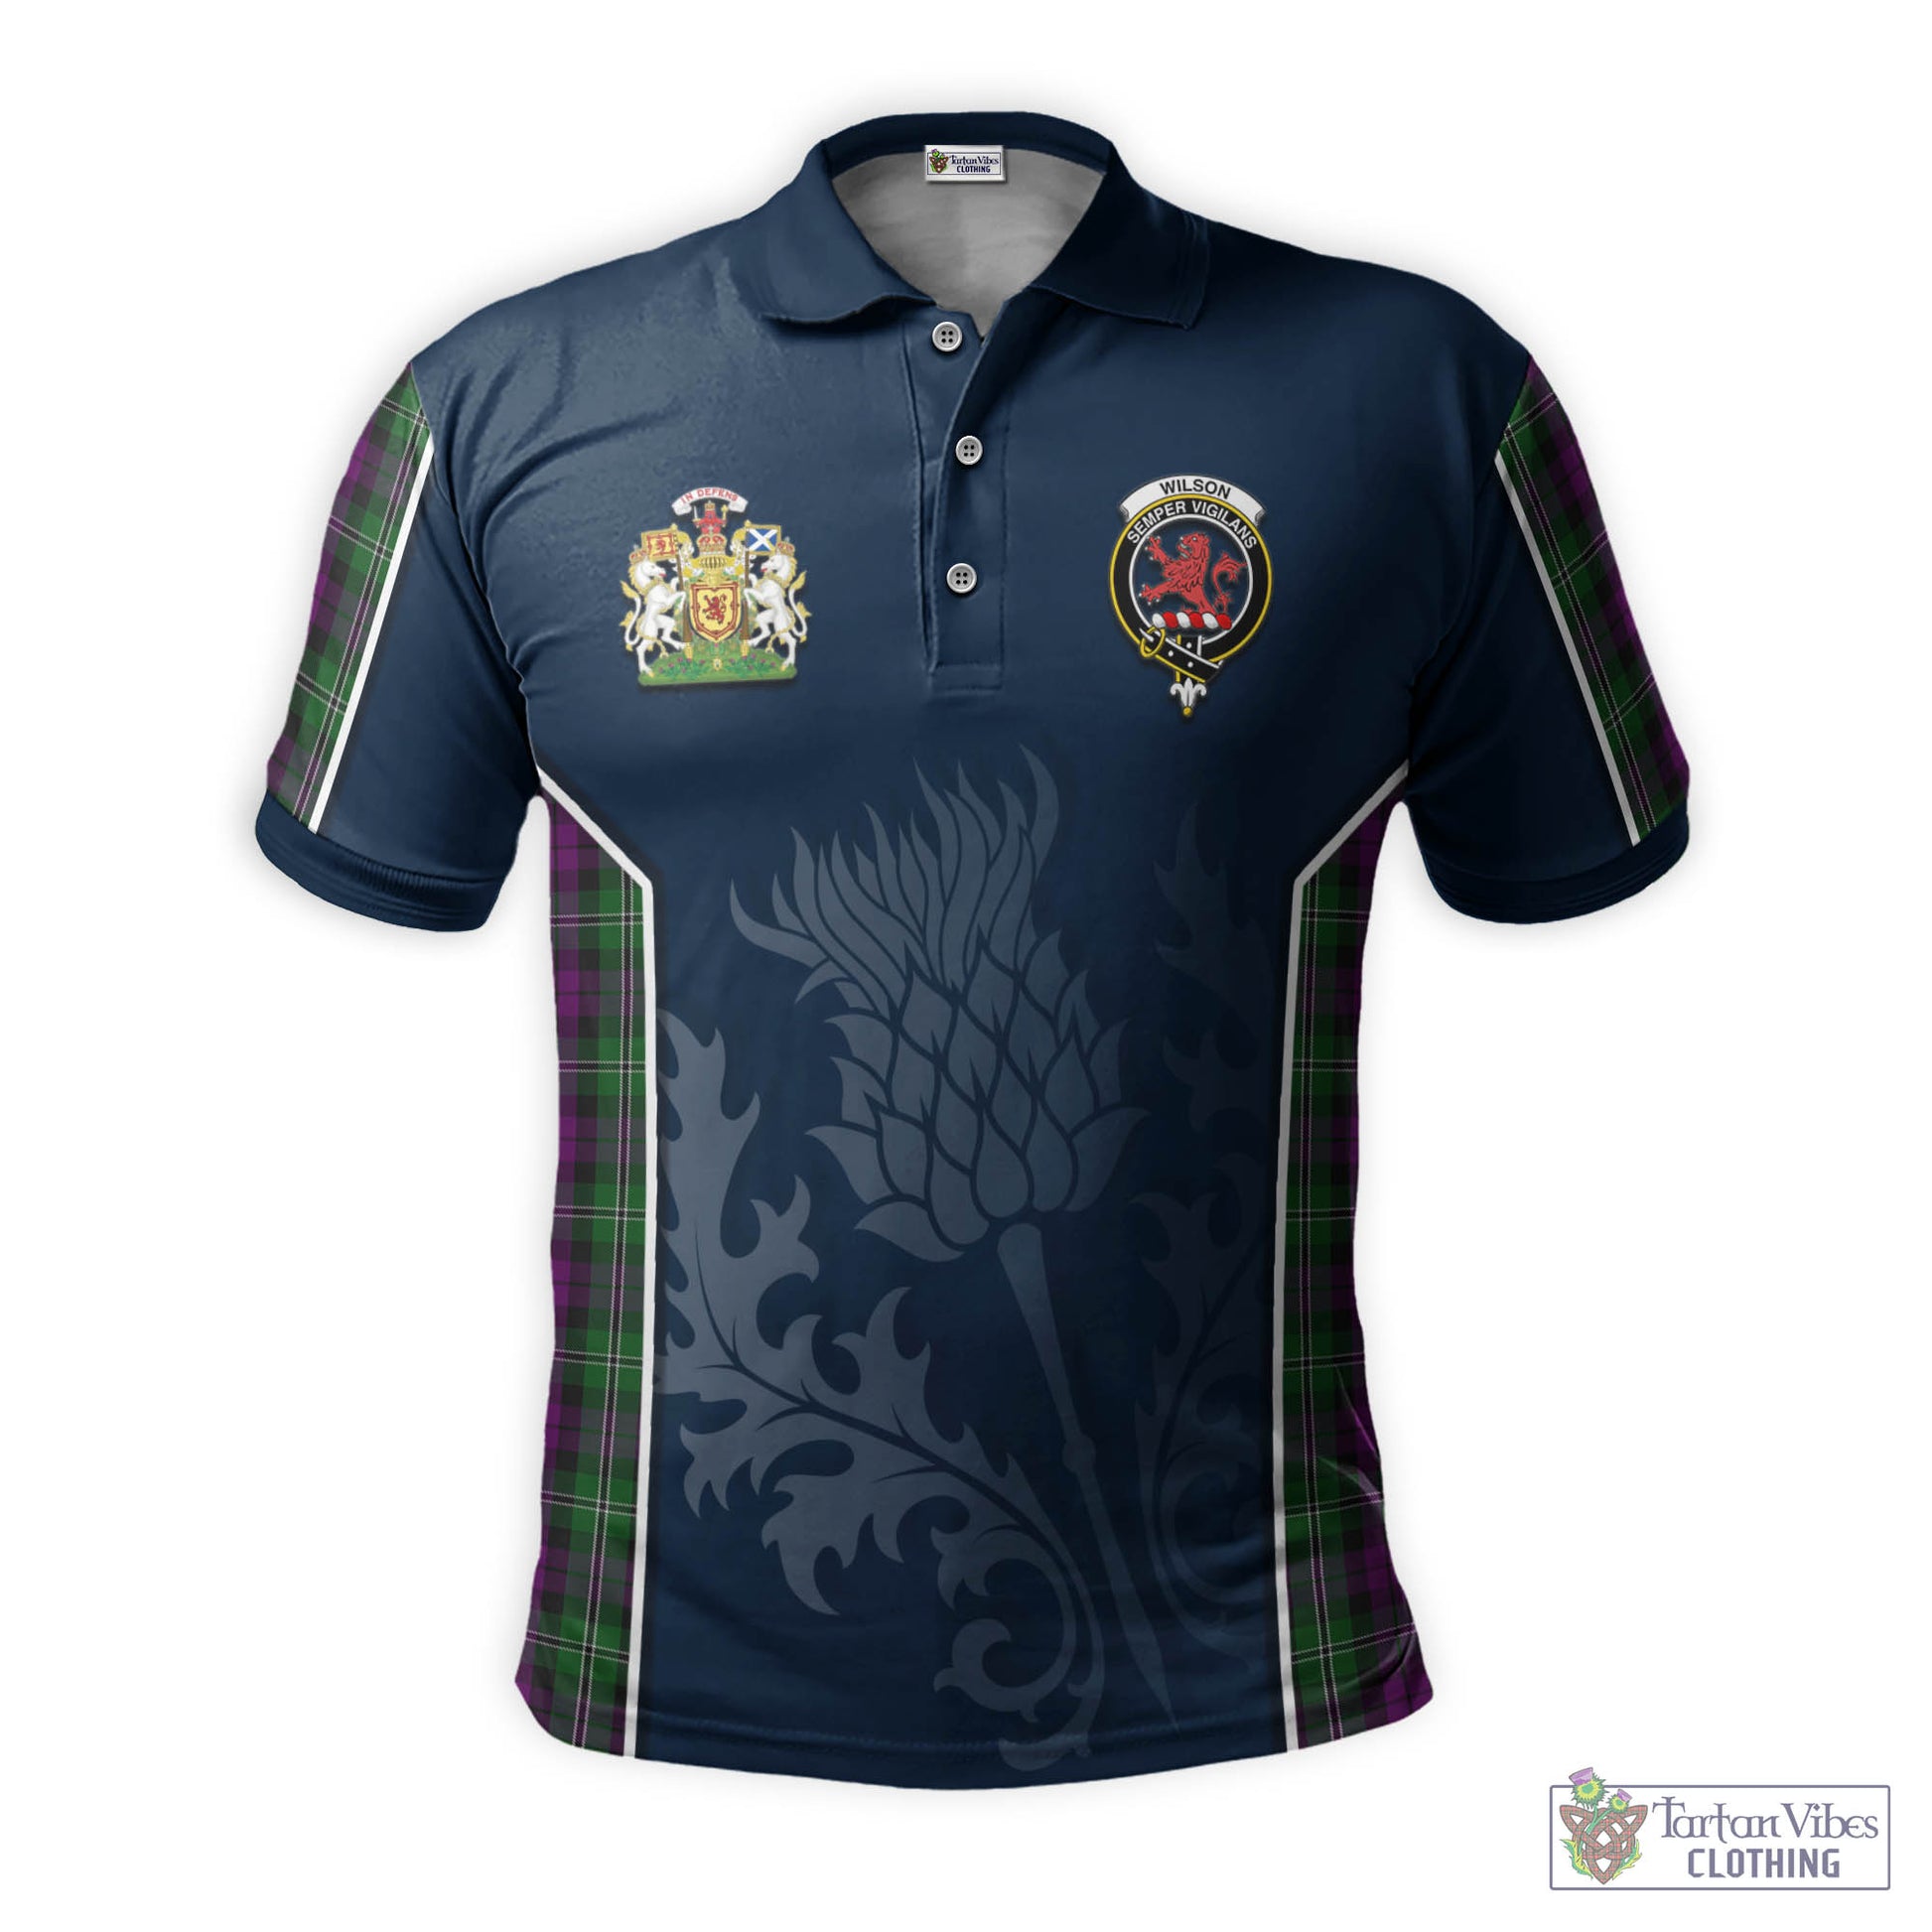 Tartan Vibes Clothing Wilson Tartan Men's Polo Shirt with Family Crest and Scottish Thistle Vibes Sport Style